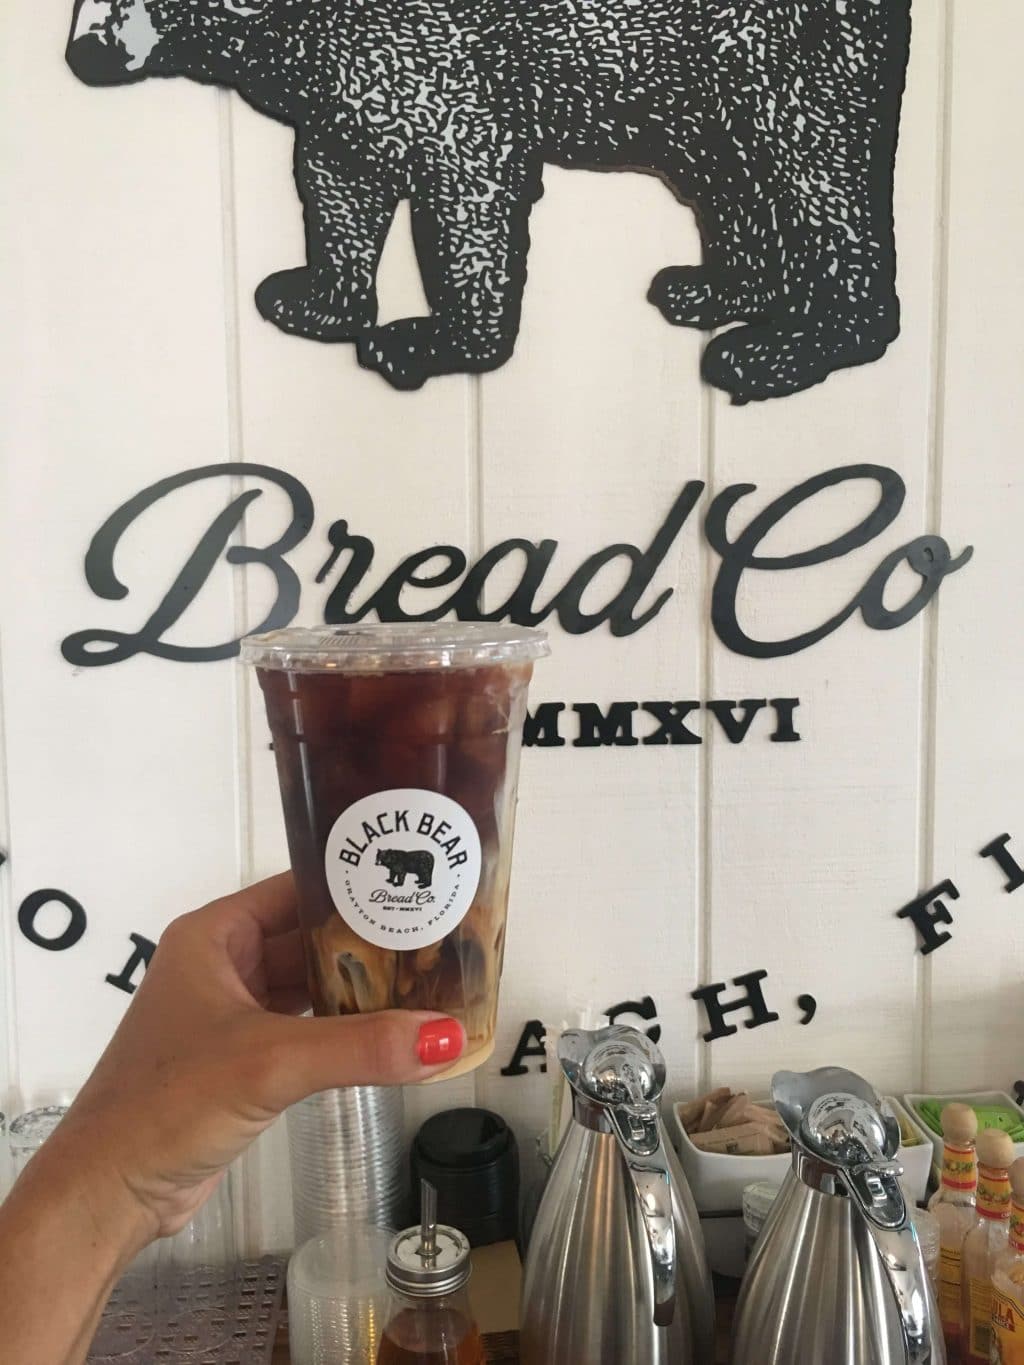 Black Bear Bread Co, 30A coffee spots, vacation favorites, stilettos and diapers